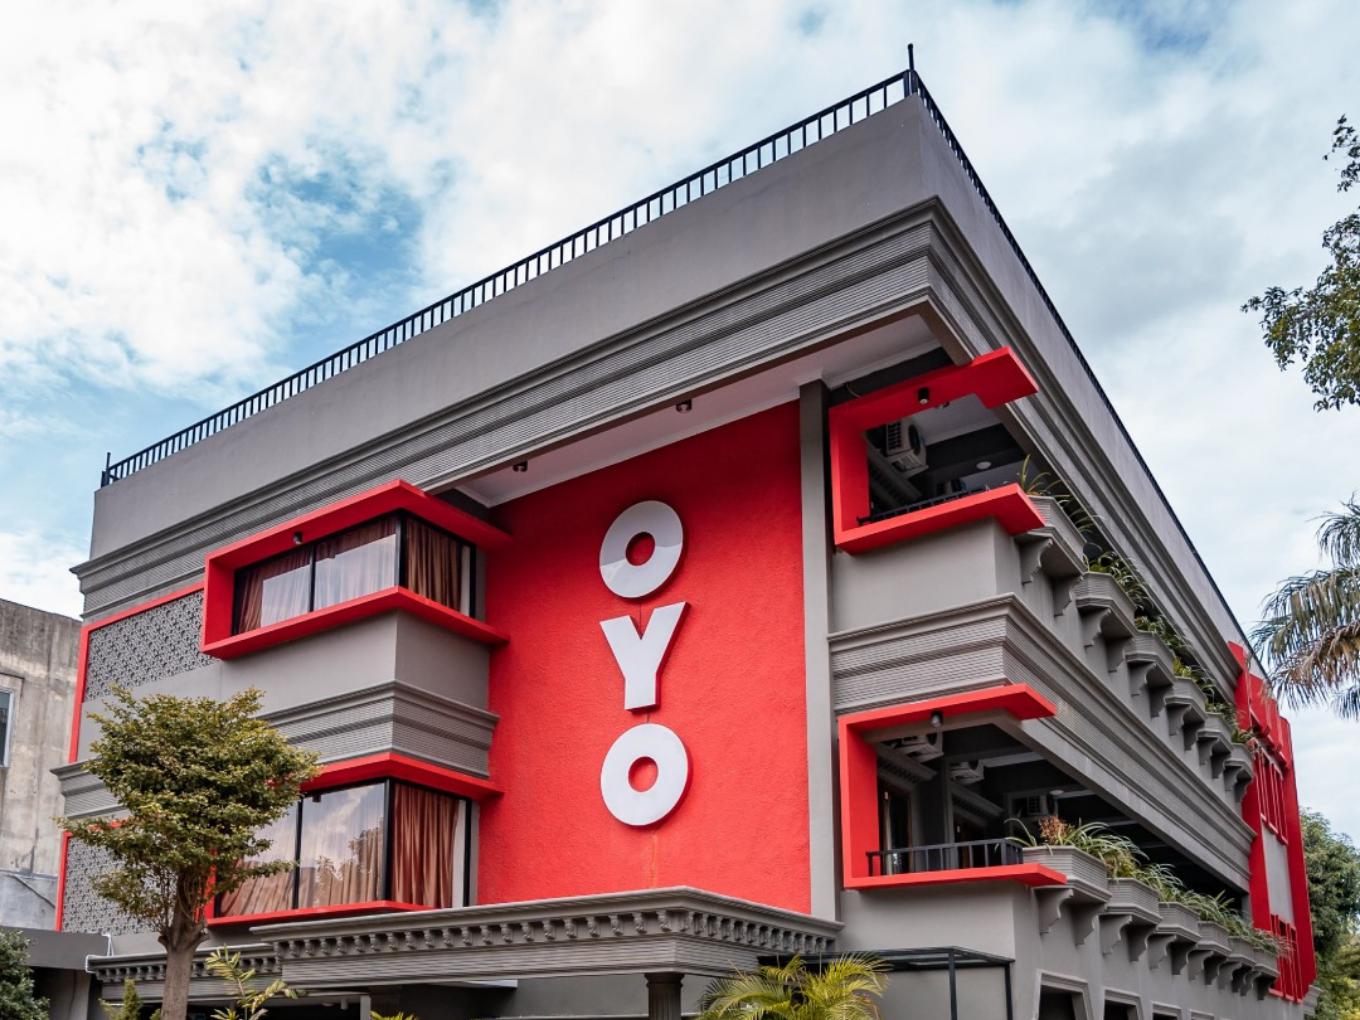 Hotel Owners Association Accuse OYO Of ‘Unfair Business Practices’